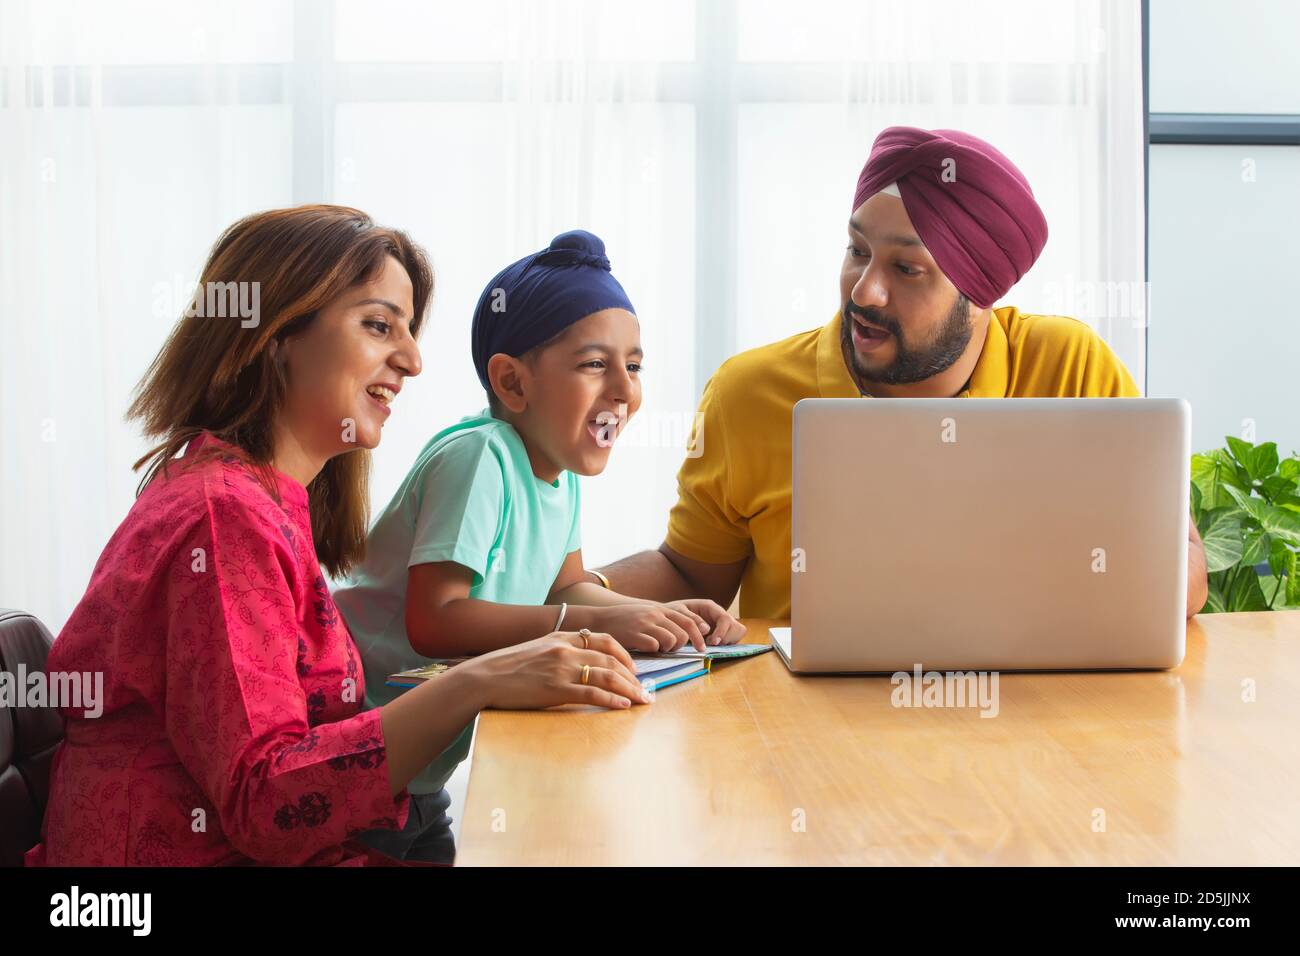 A SIKH BOY ENTHUSIASTICALLY LEARNING WHILE PARENTS TEACH HIM USING LAPTOP Stock Photo